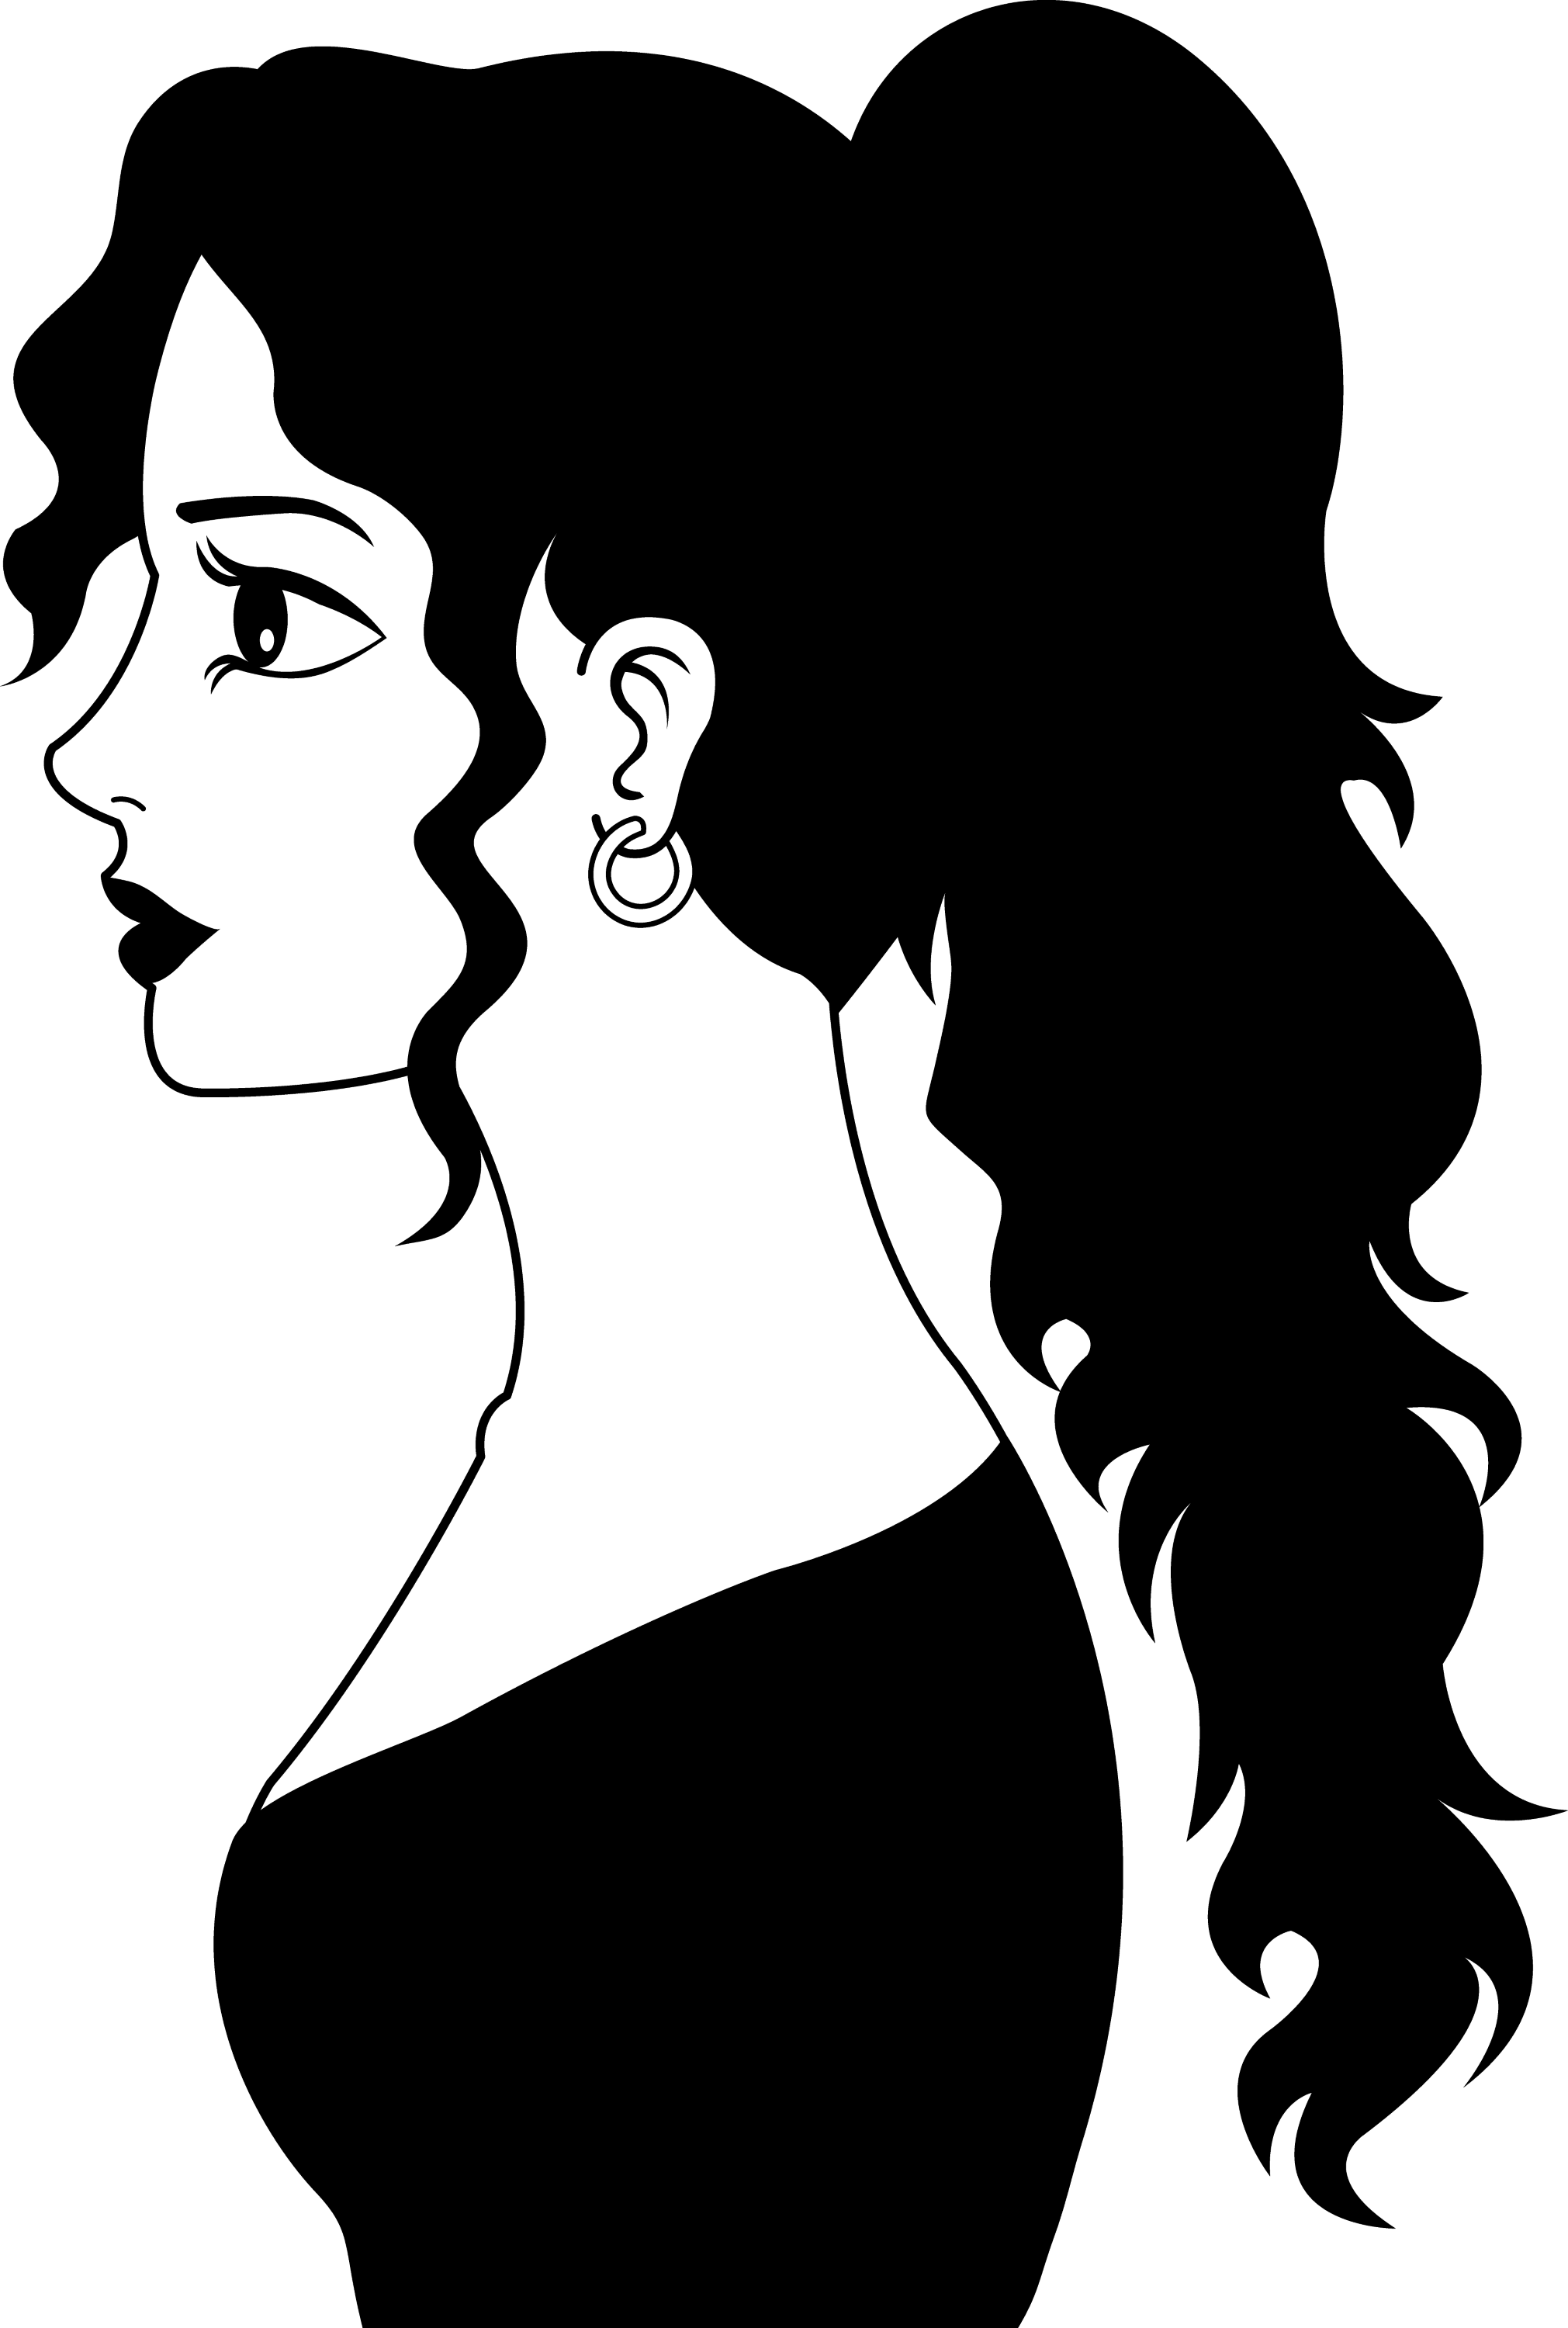 Profile of a Woman in Black and White - Free Clip Art